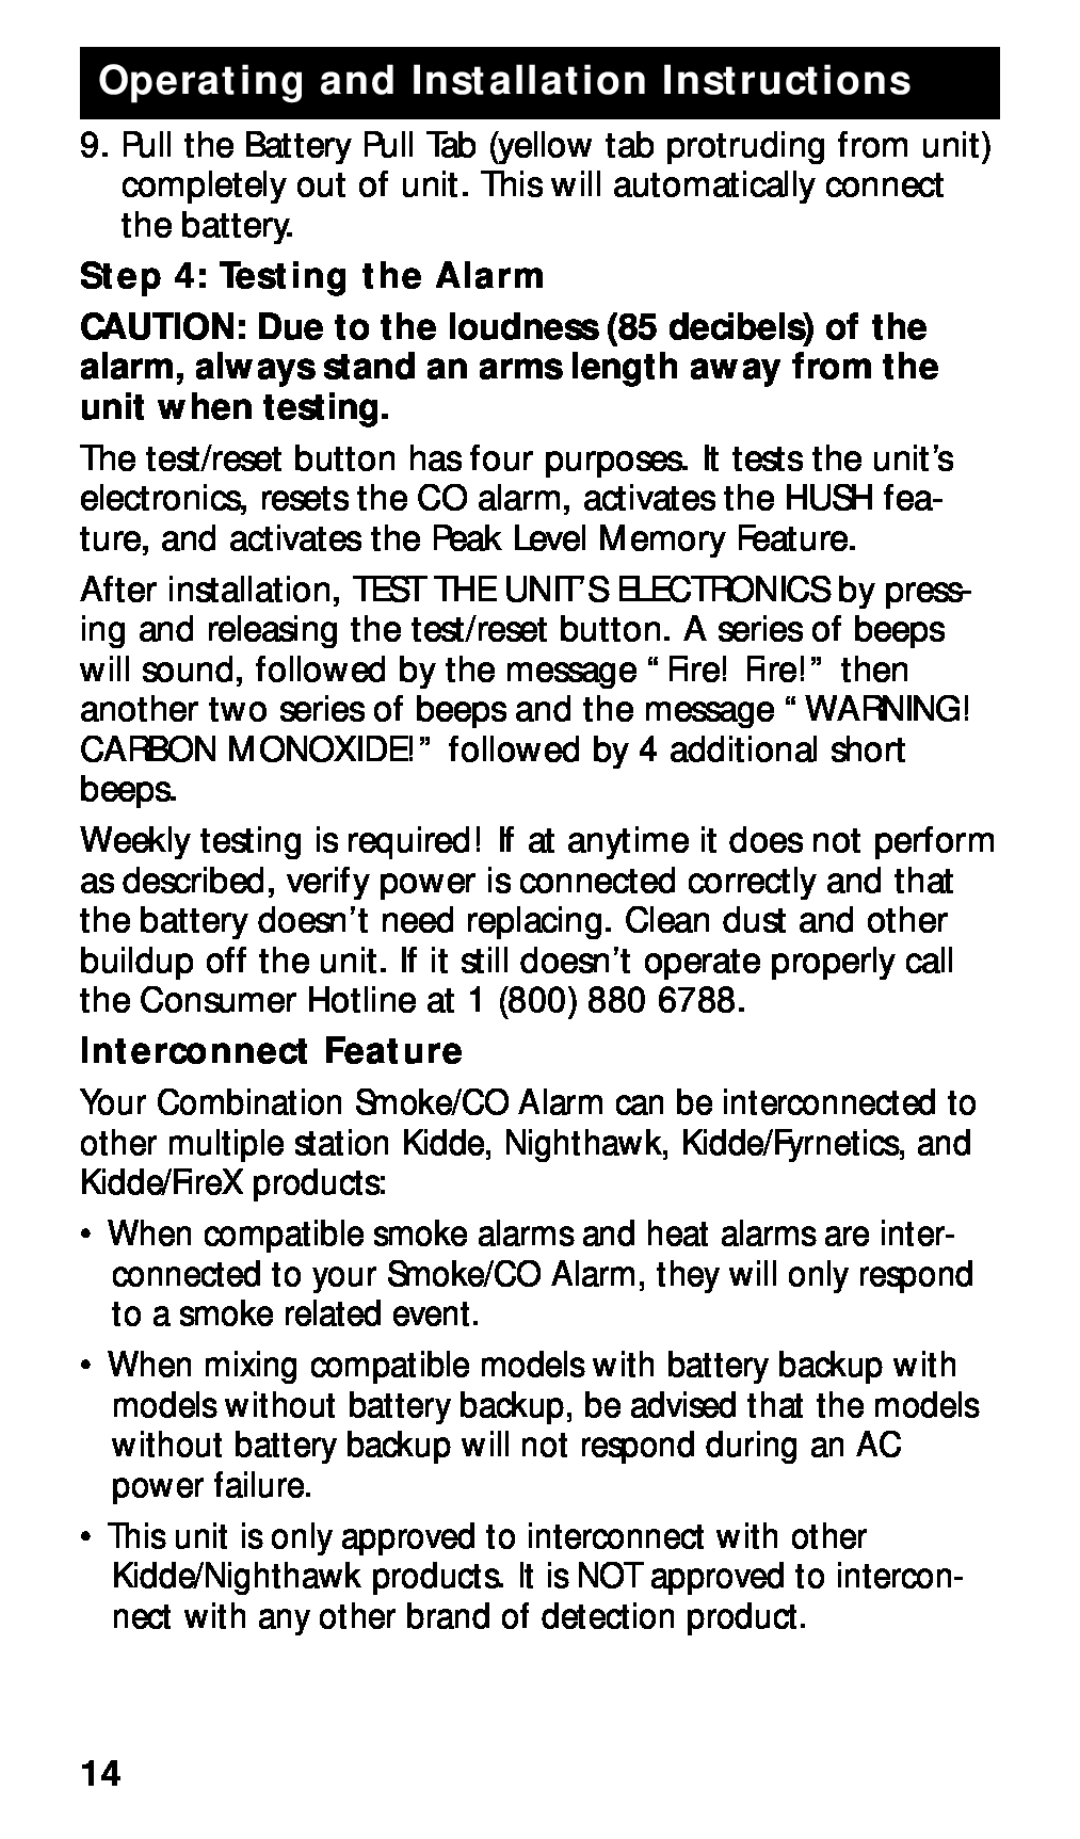 Kidde KN-COPE-I manual Testing the Alarm, Interconnect Feature, Operating and Installation Instructions 